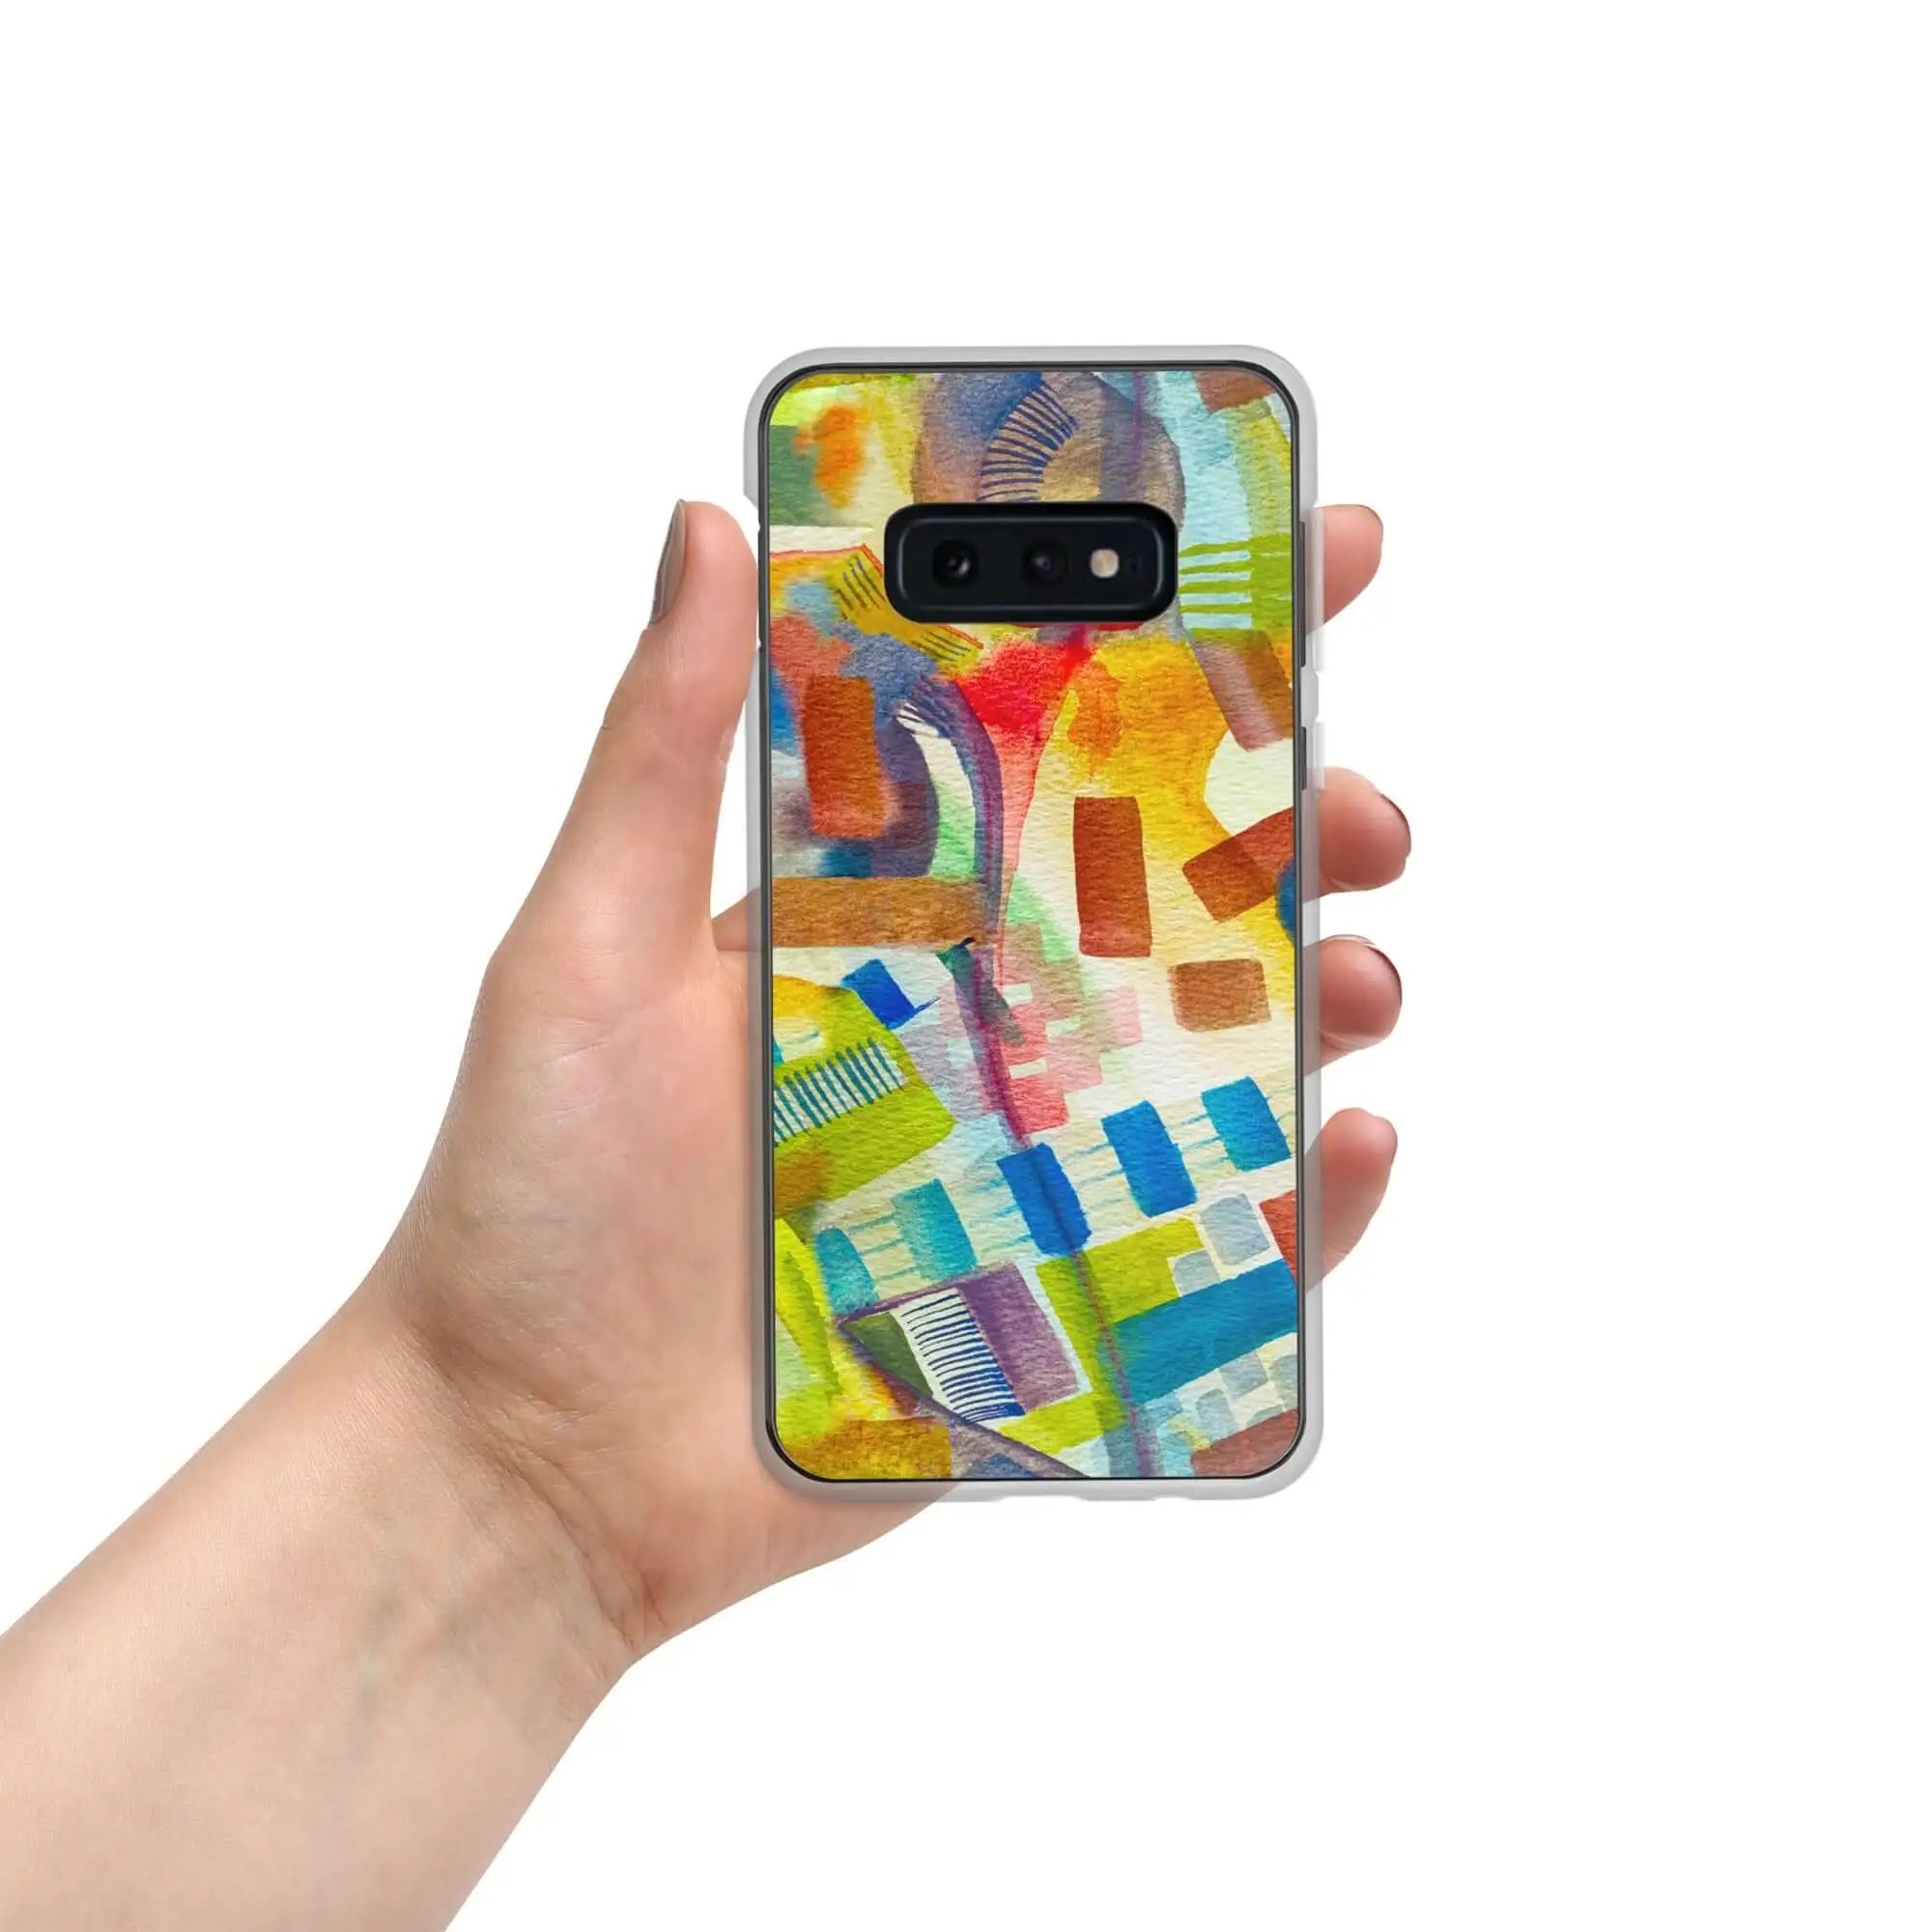 Samsung case with vibrant abstract painting design